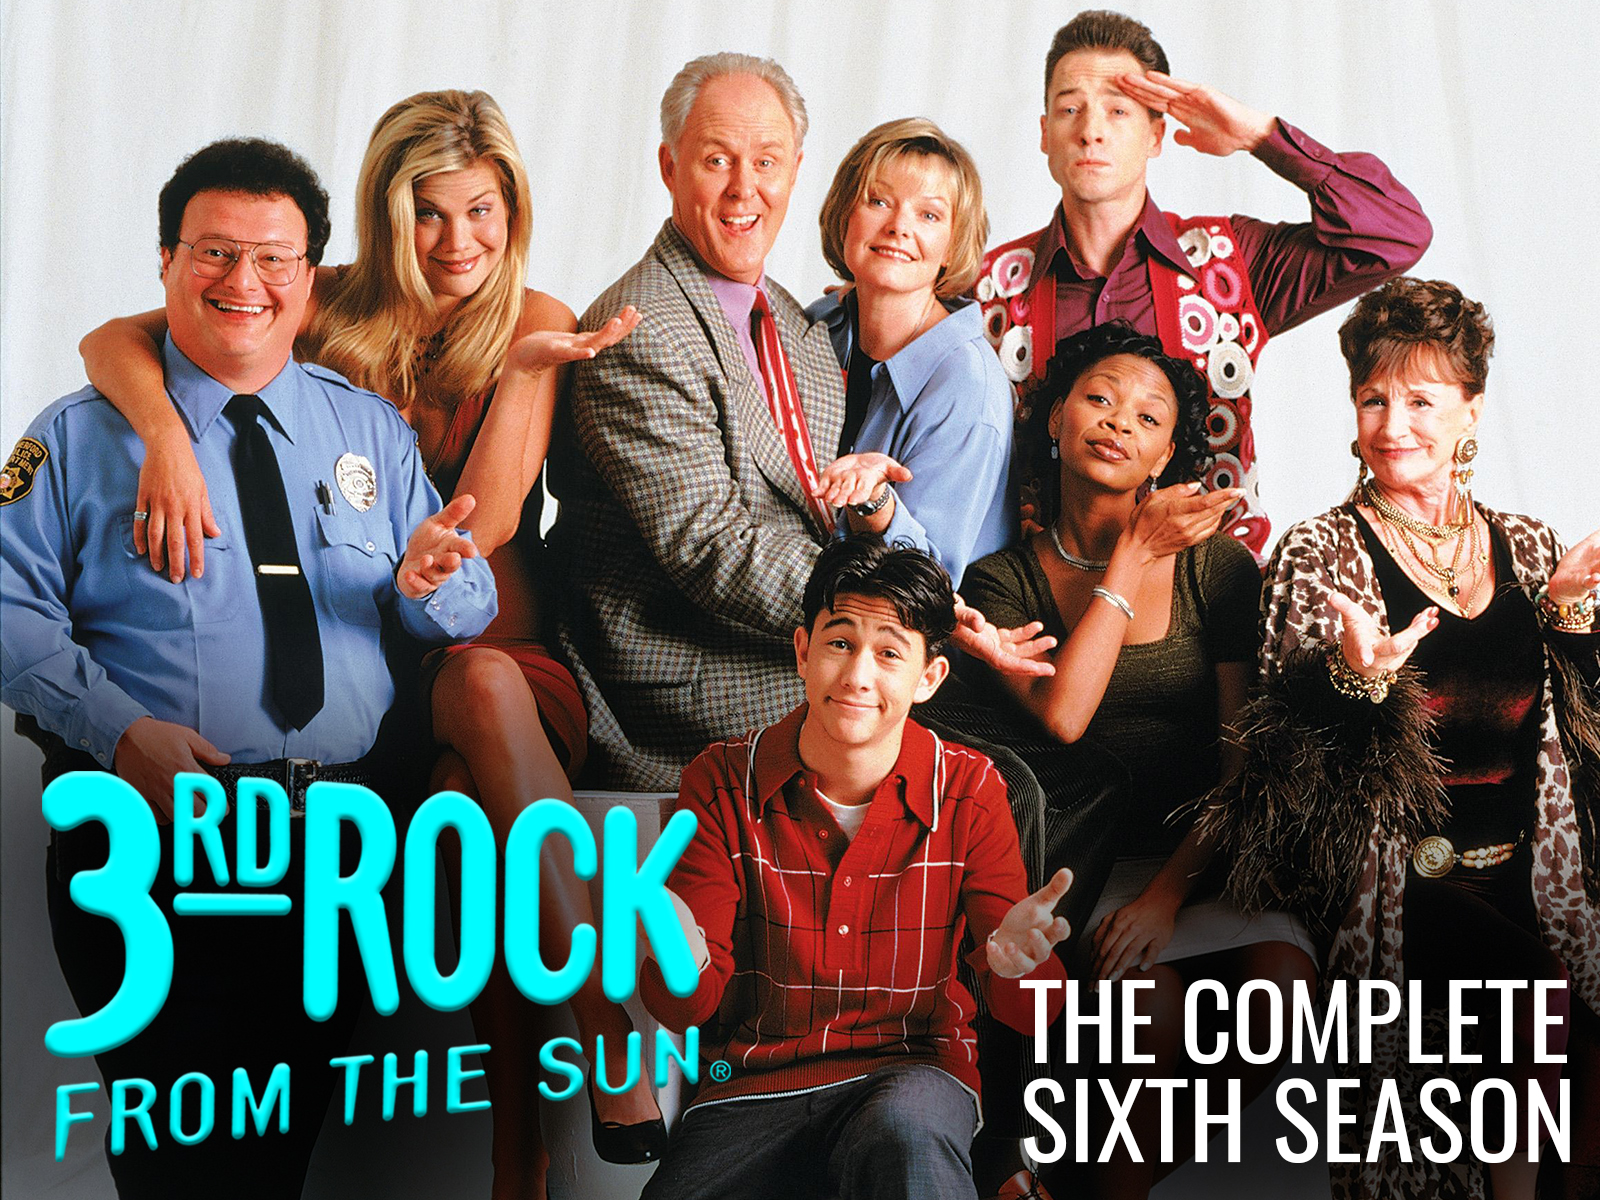 where can i watch third rock from the sun